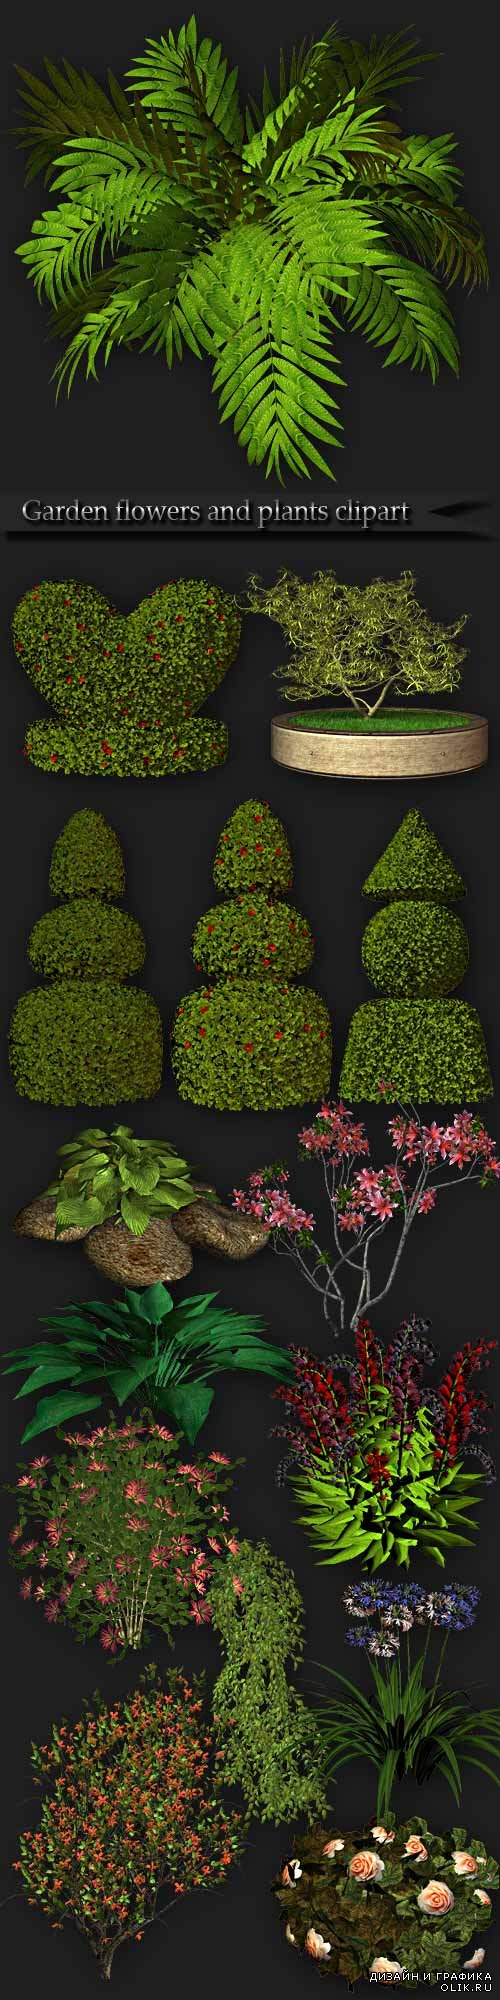 Garden flowers and plants clipart PNG